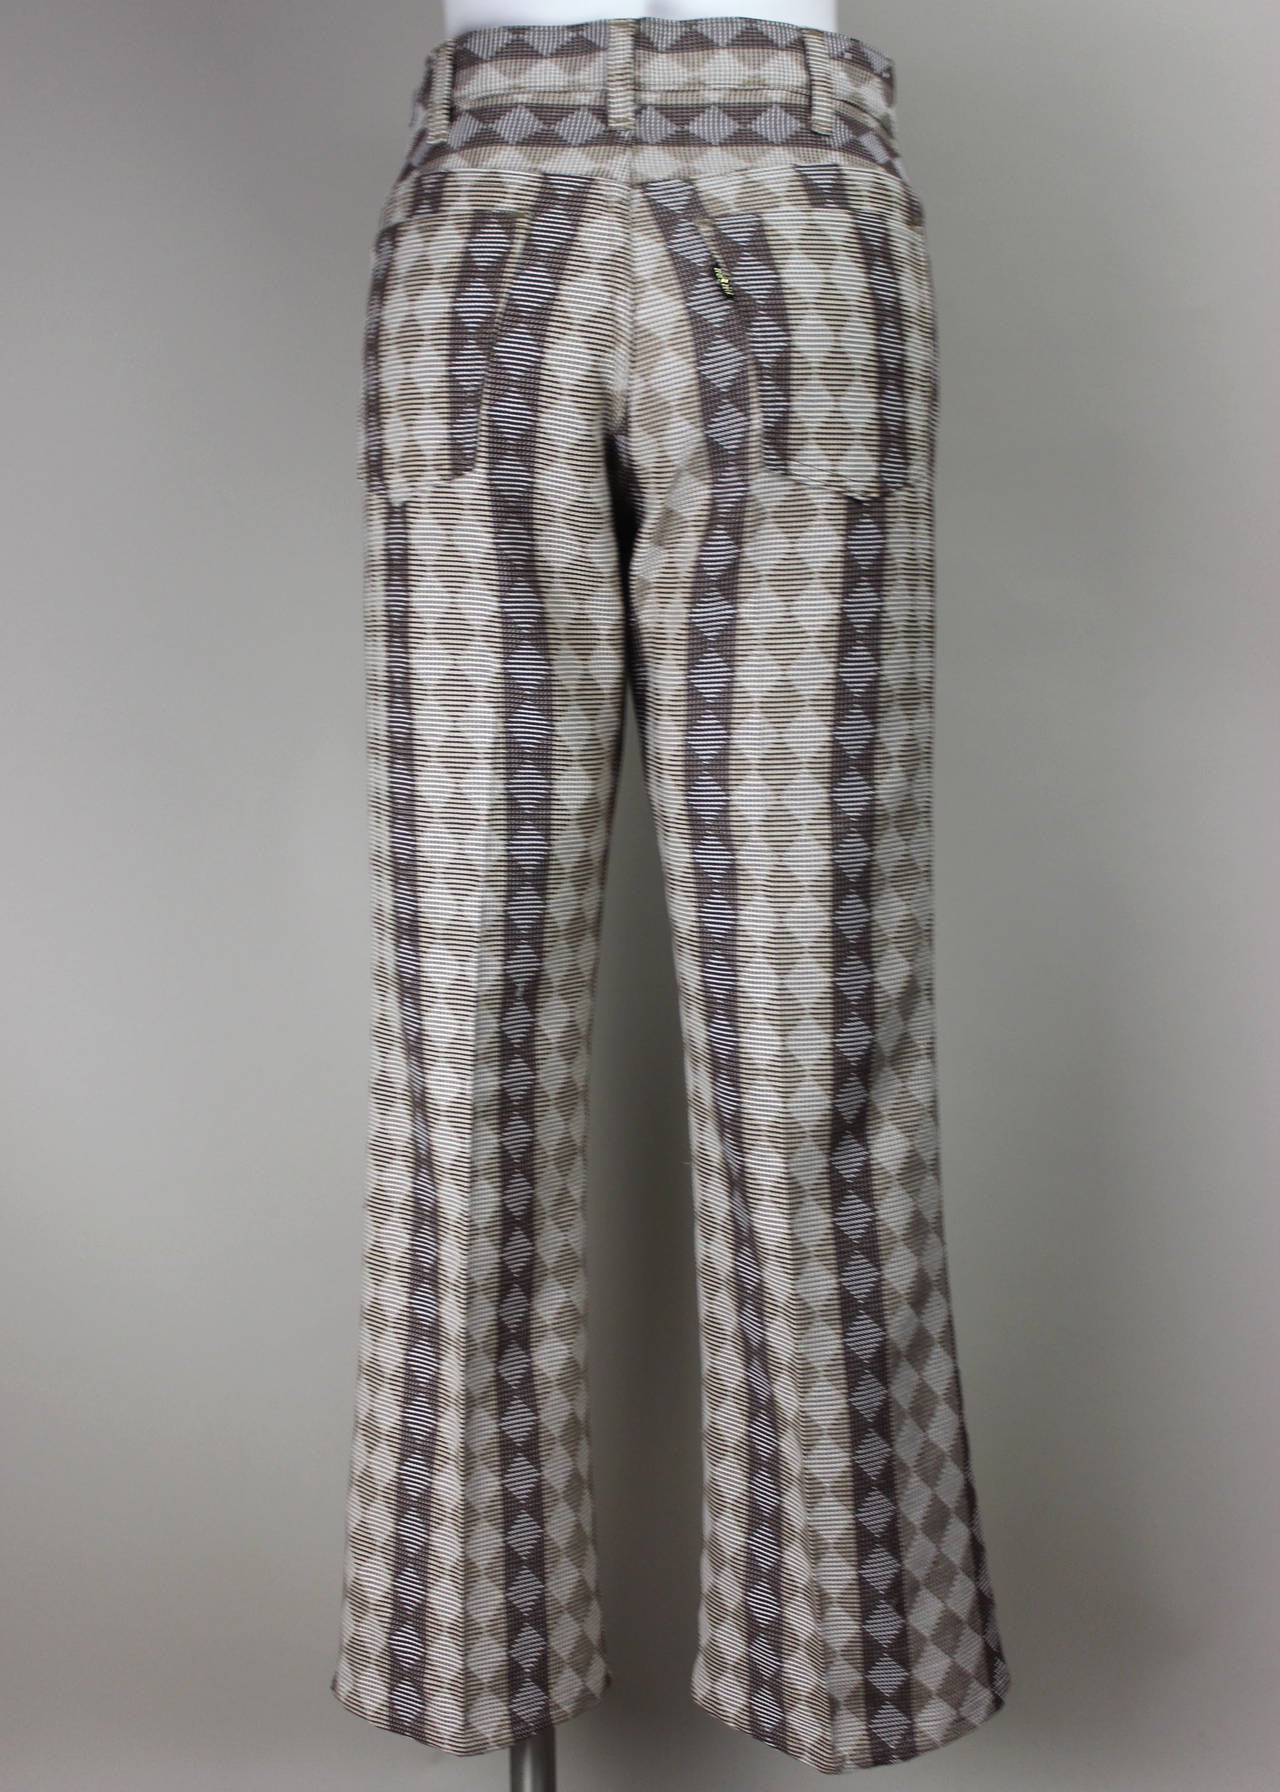 Gray Levi's Early 1970s Big E Graphic Print Bell Bottoms